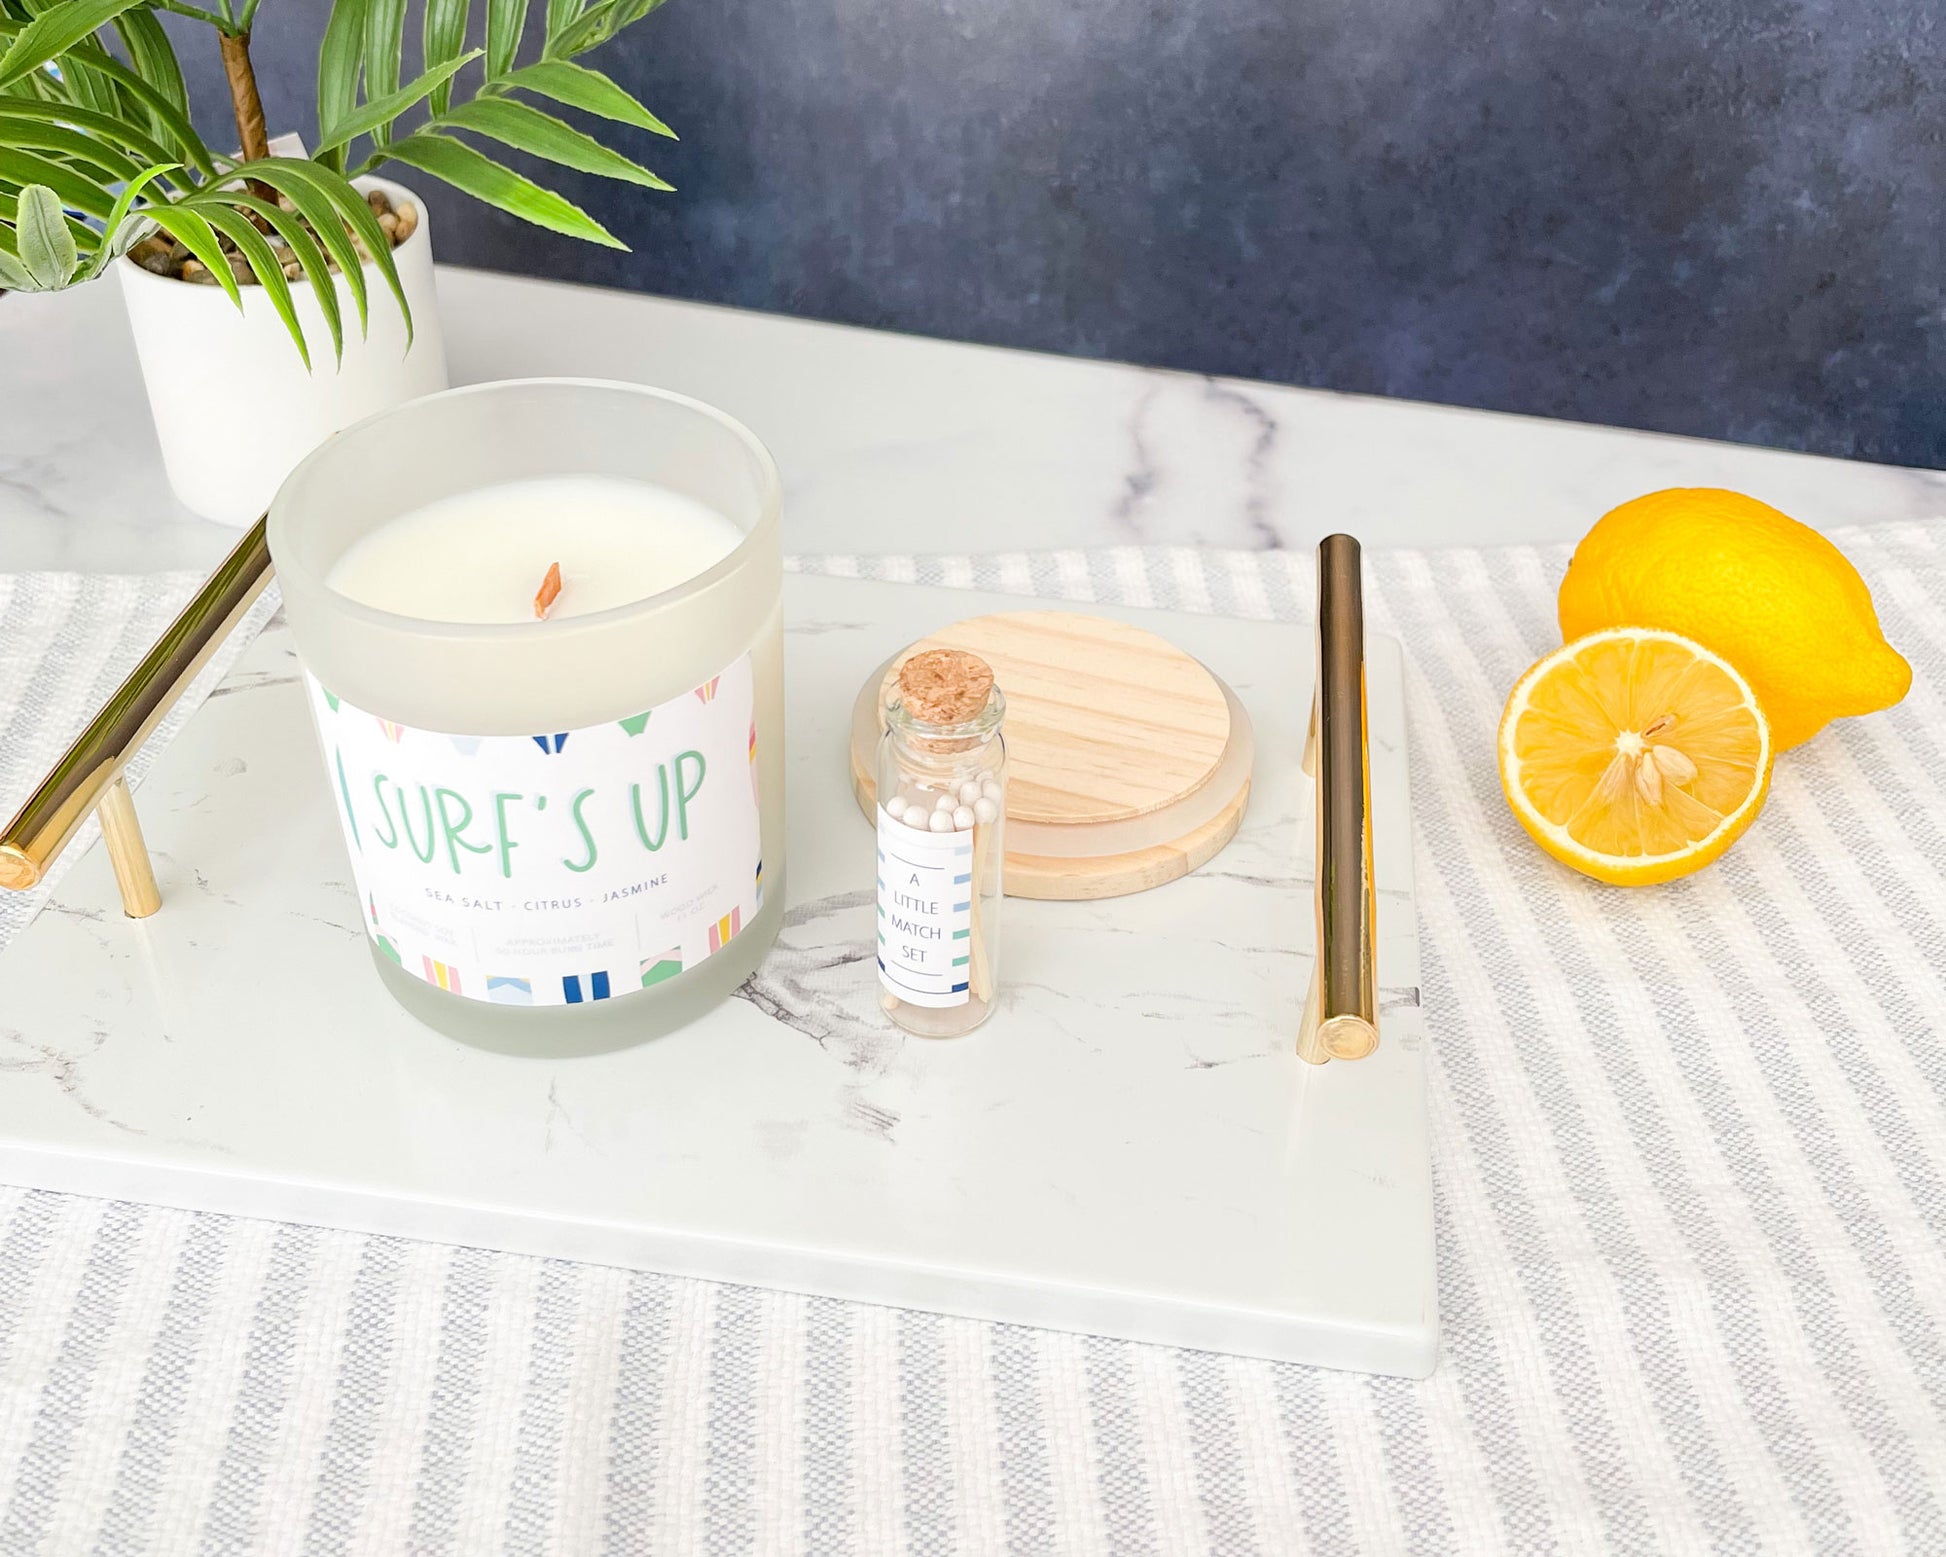 surfs up candle with match stick gift set, sea salt citrus jasmine scent, soy wax candle, set of ten matches in cork bottle, frosted candle vessel with wood lid, Meredith Collie paper